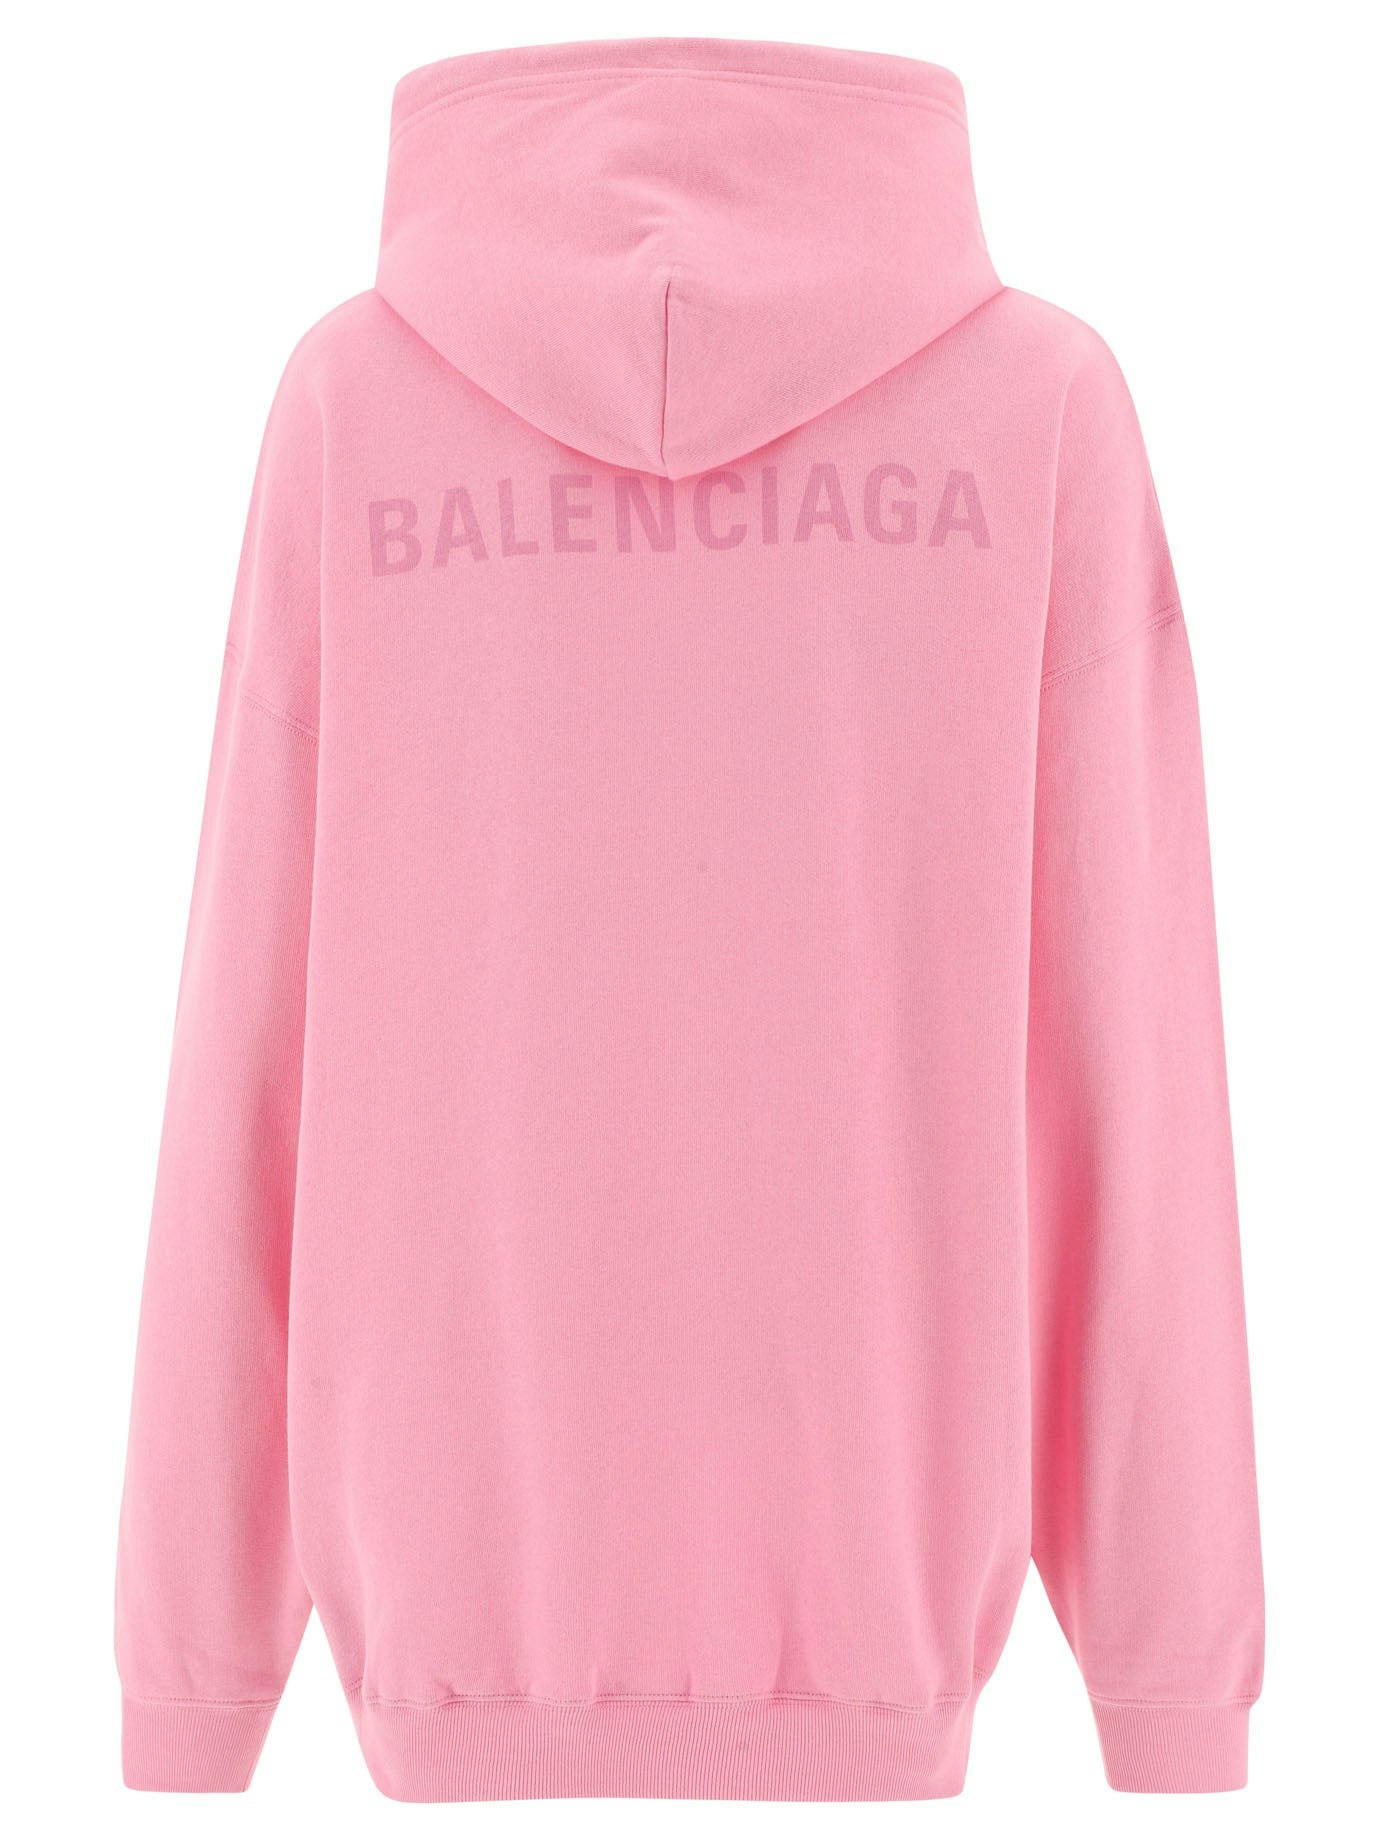 BALENCIAGA Molleton Bouclette LogoEmbroidered Distressed CottonJersey  ZipUp Hoodie  MR PORTER